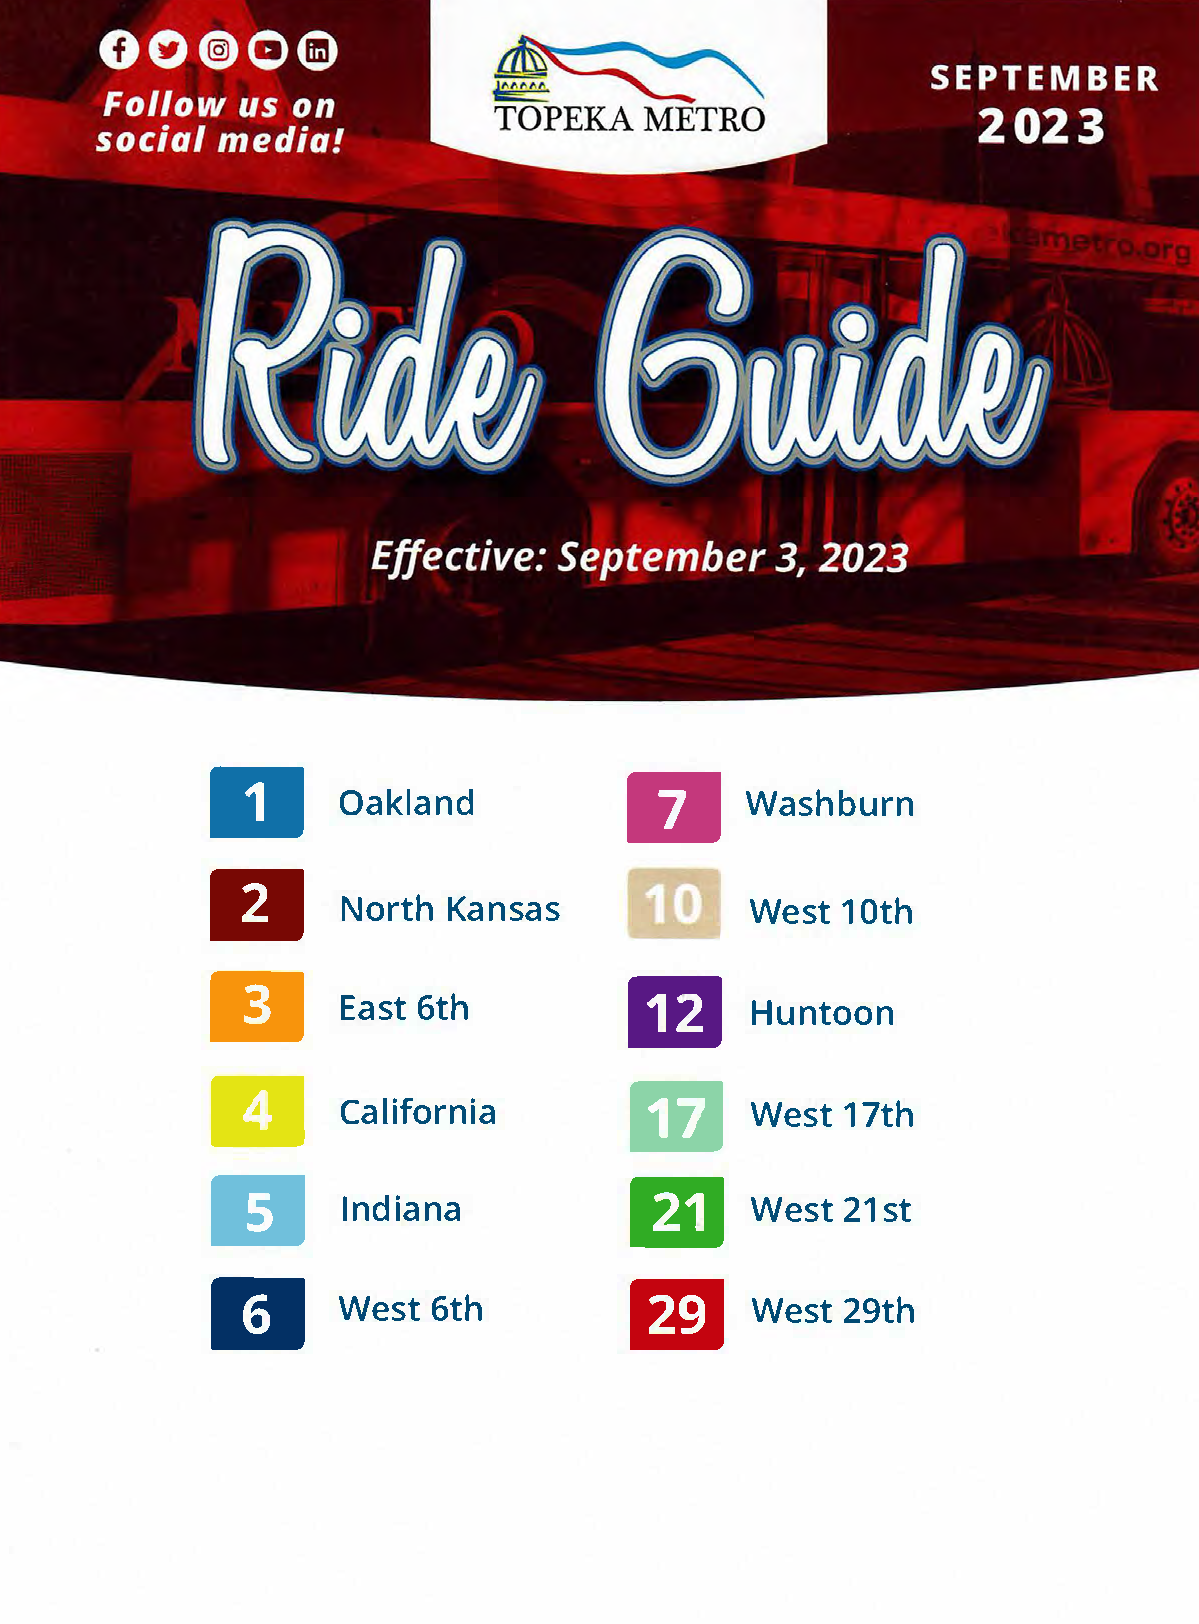 Download the Ride Guide